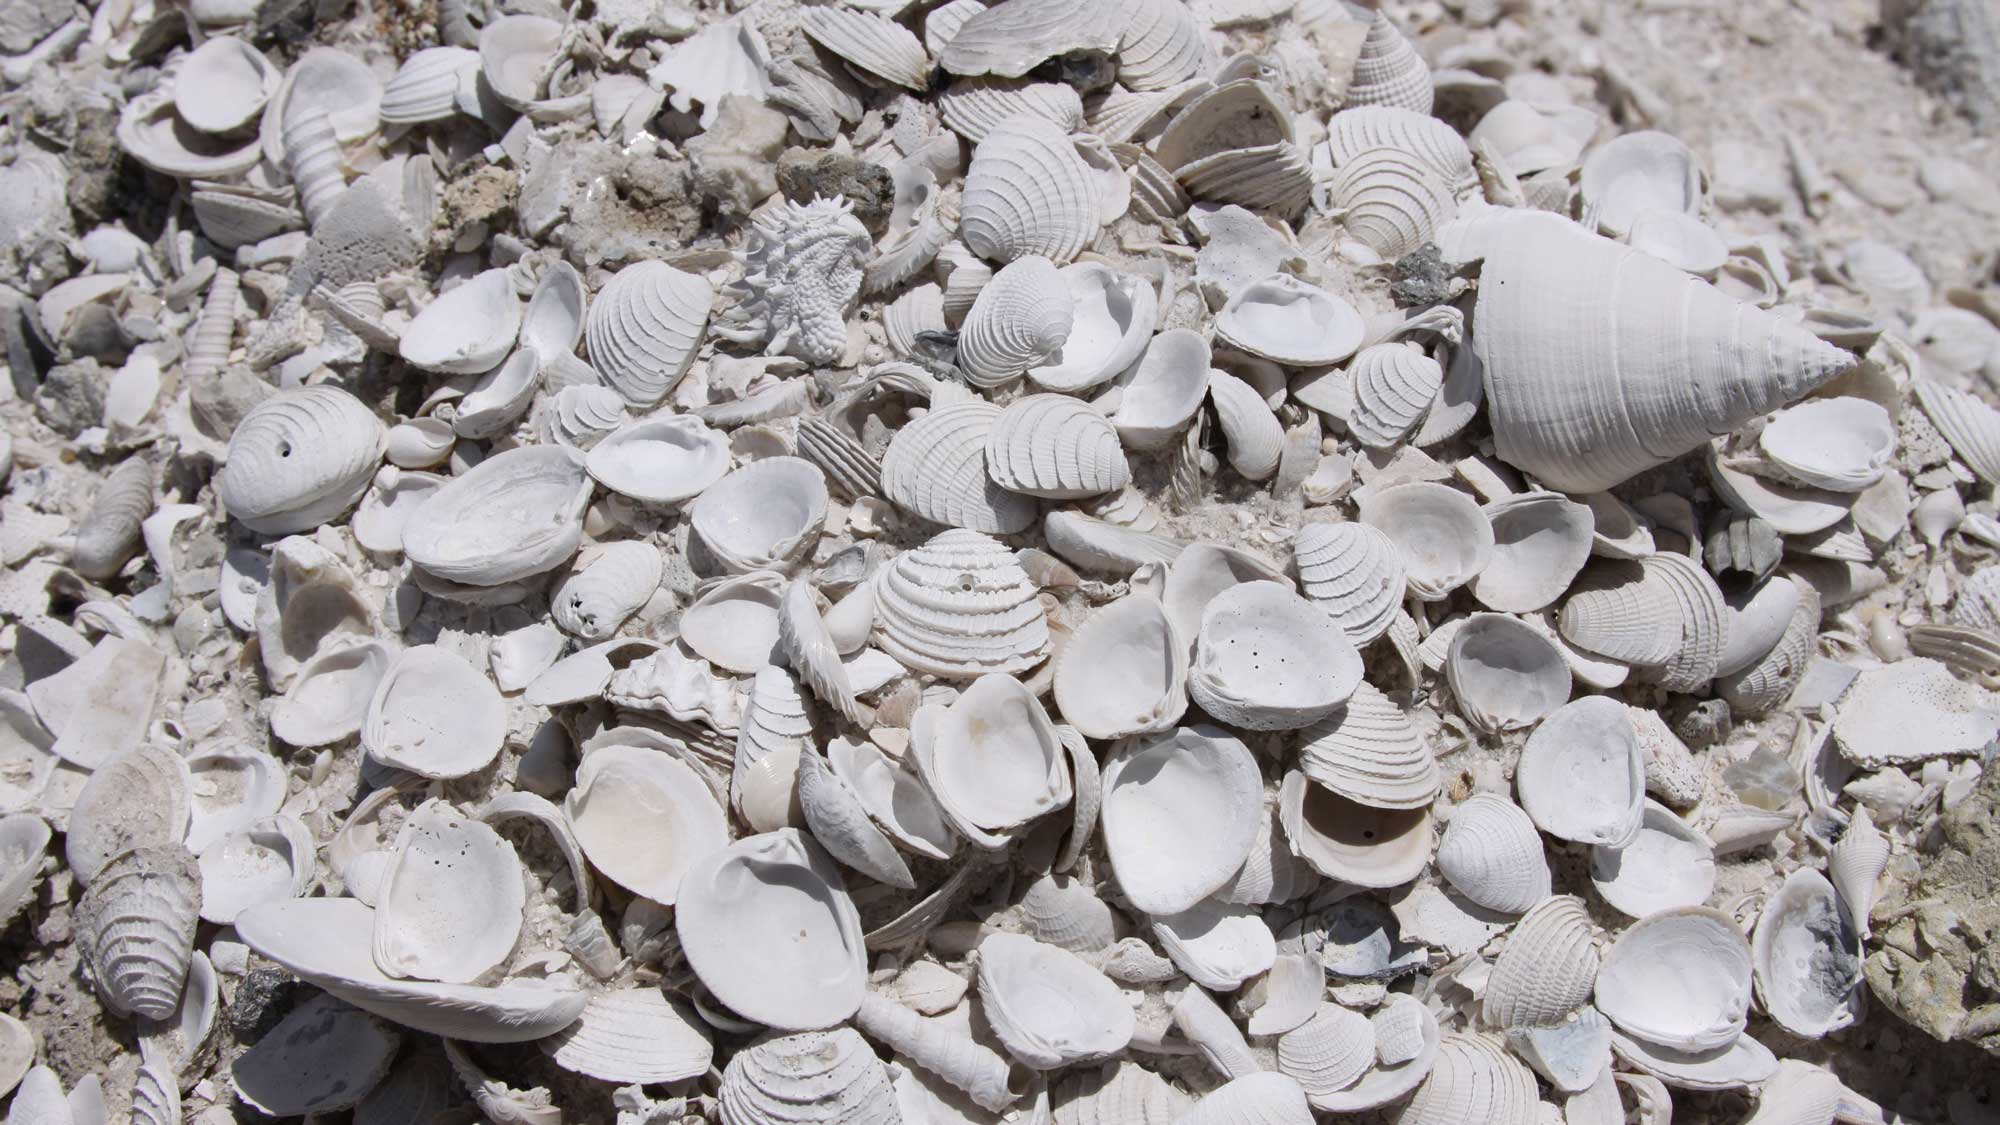 Photograph of fossil bivalve and gastropod shells.